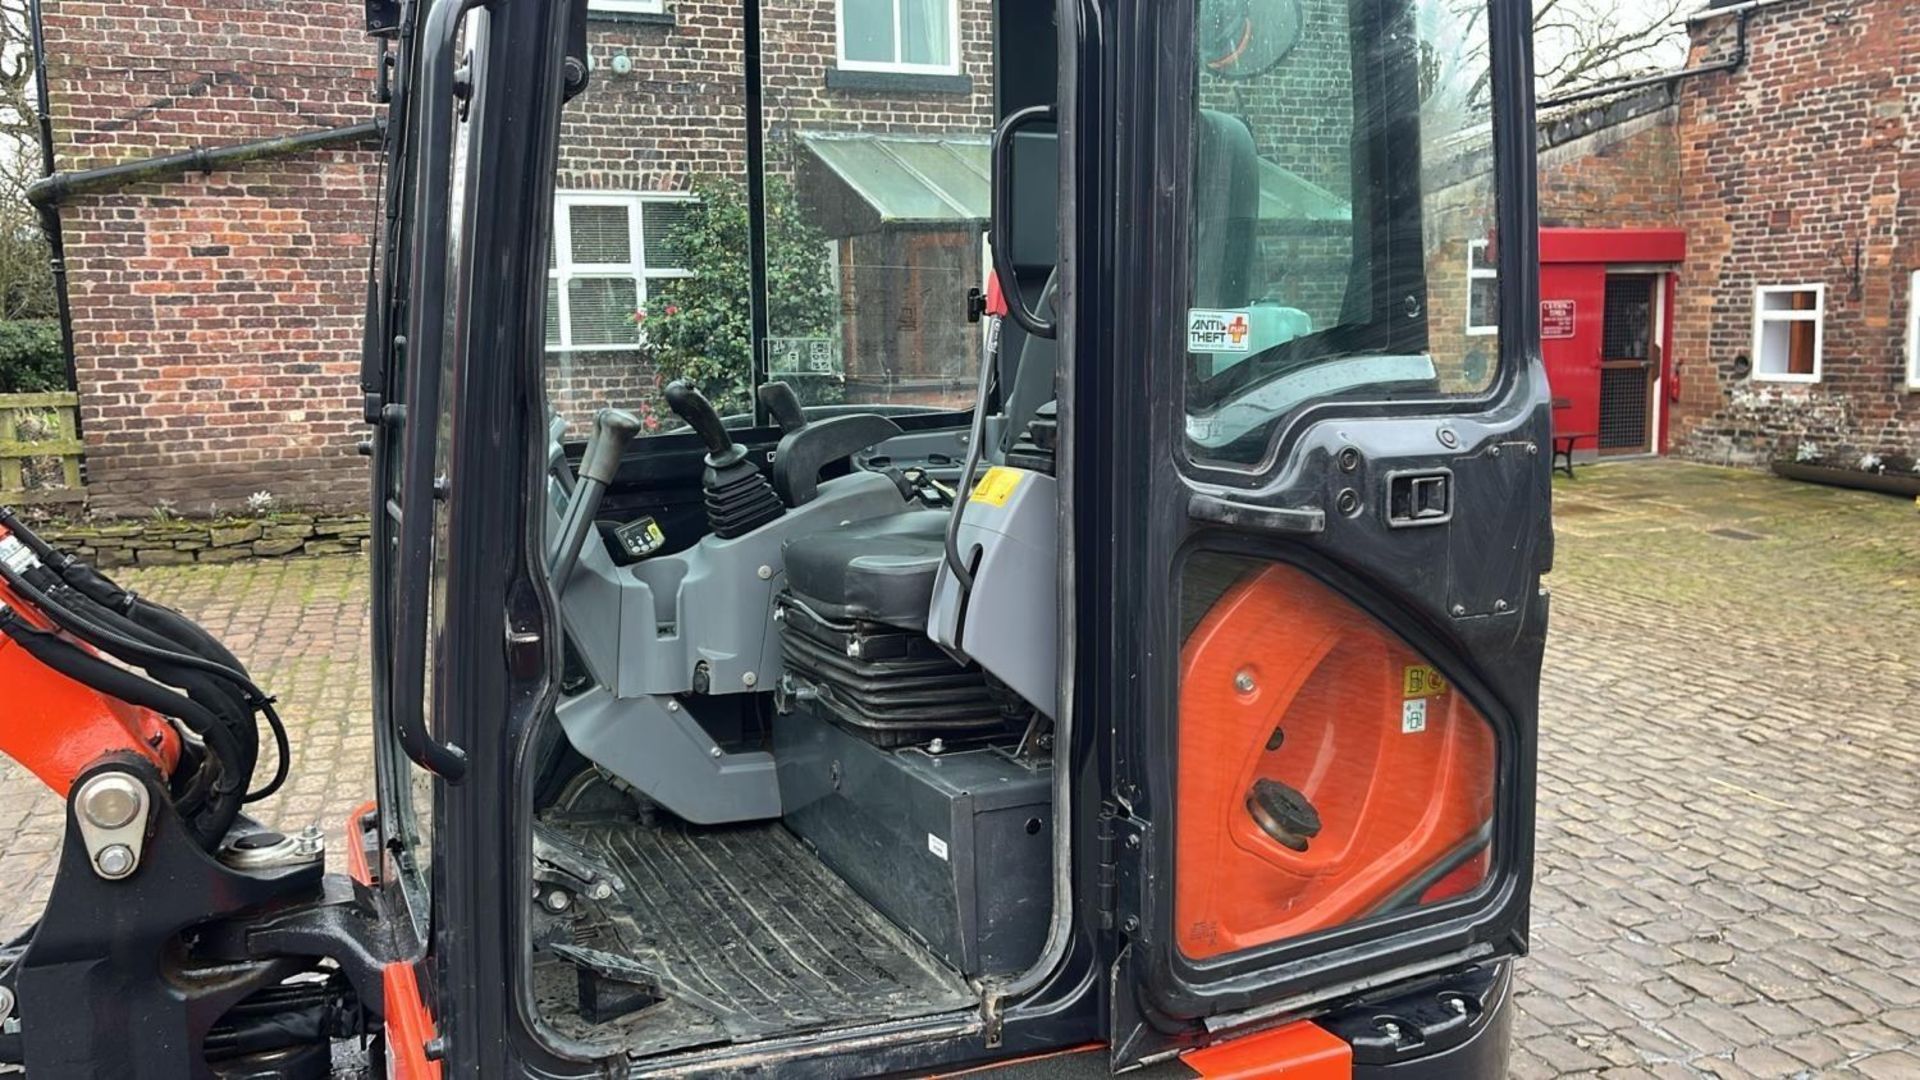 2019 KUBOTA U48-4 COMPACT EXCAVATOR 552 HOURS WITH HYDRAULIC QUICK HITCH TO BE SOLD WITH 4 BUCKETS - Image 15 of 24